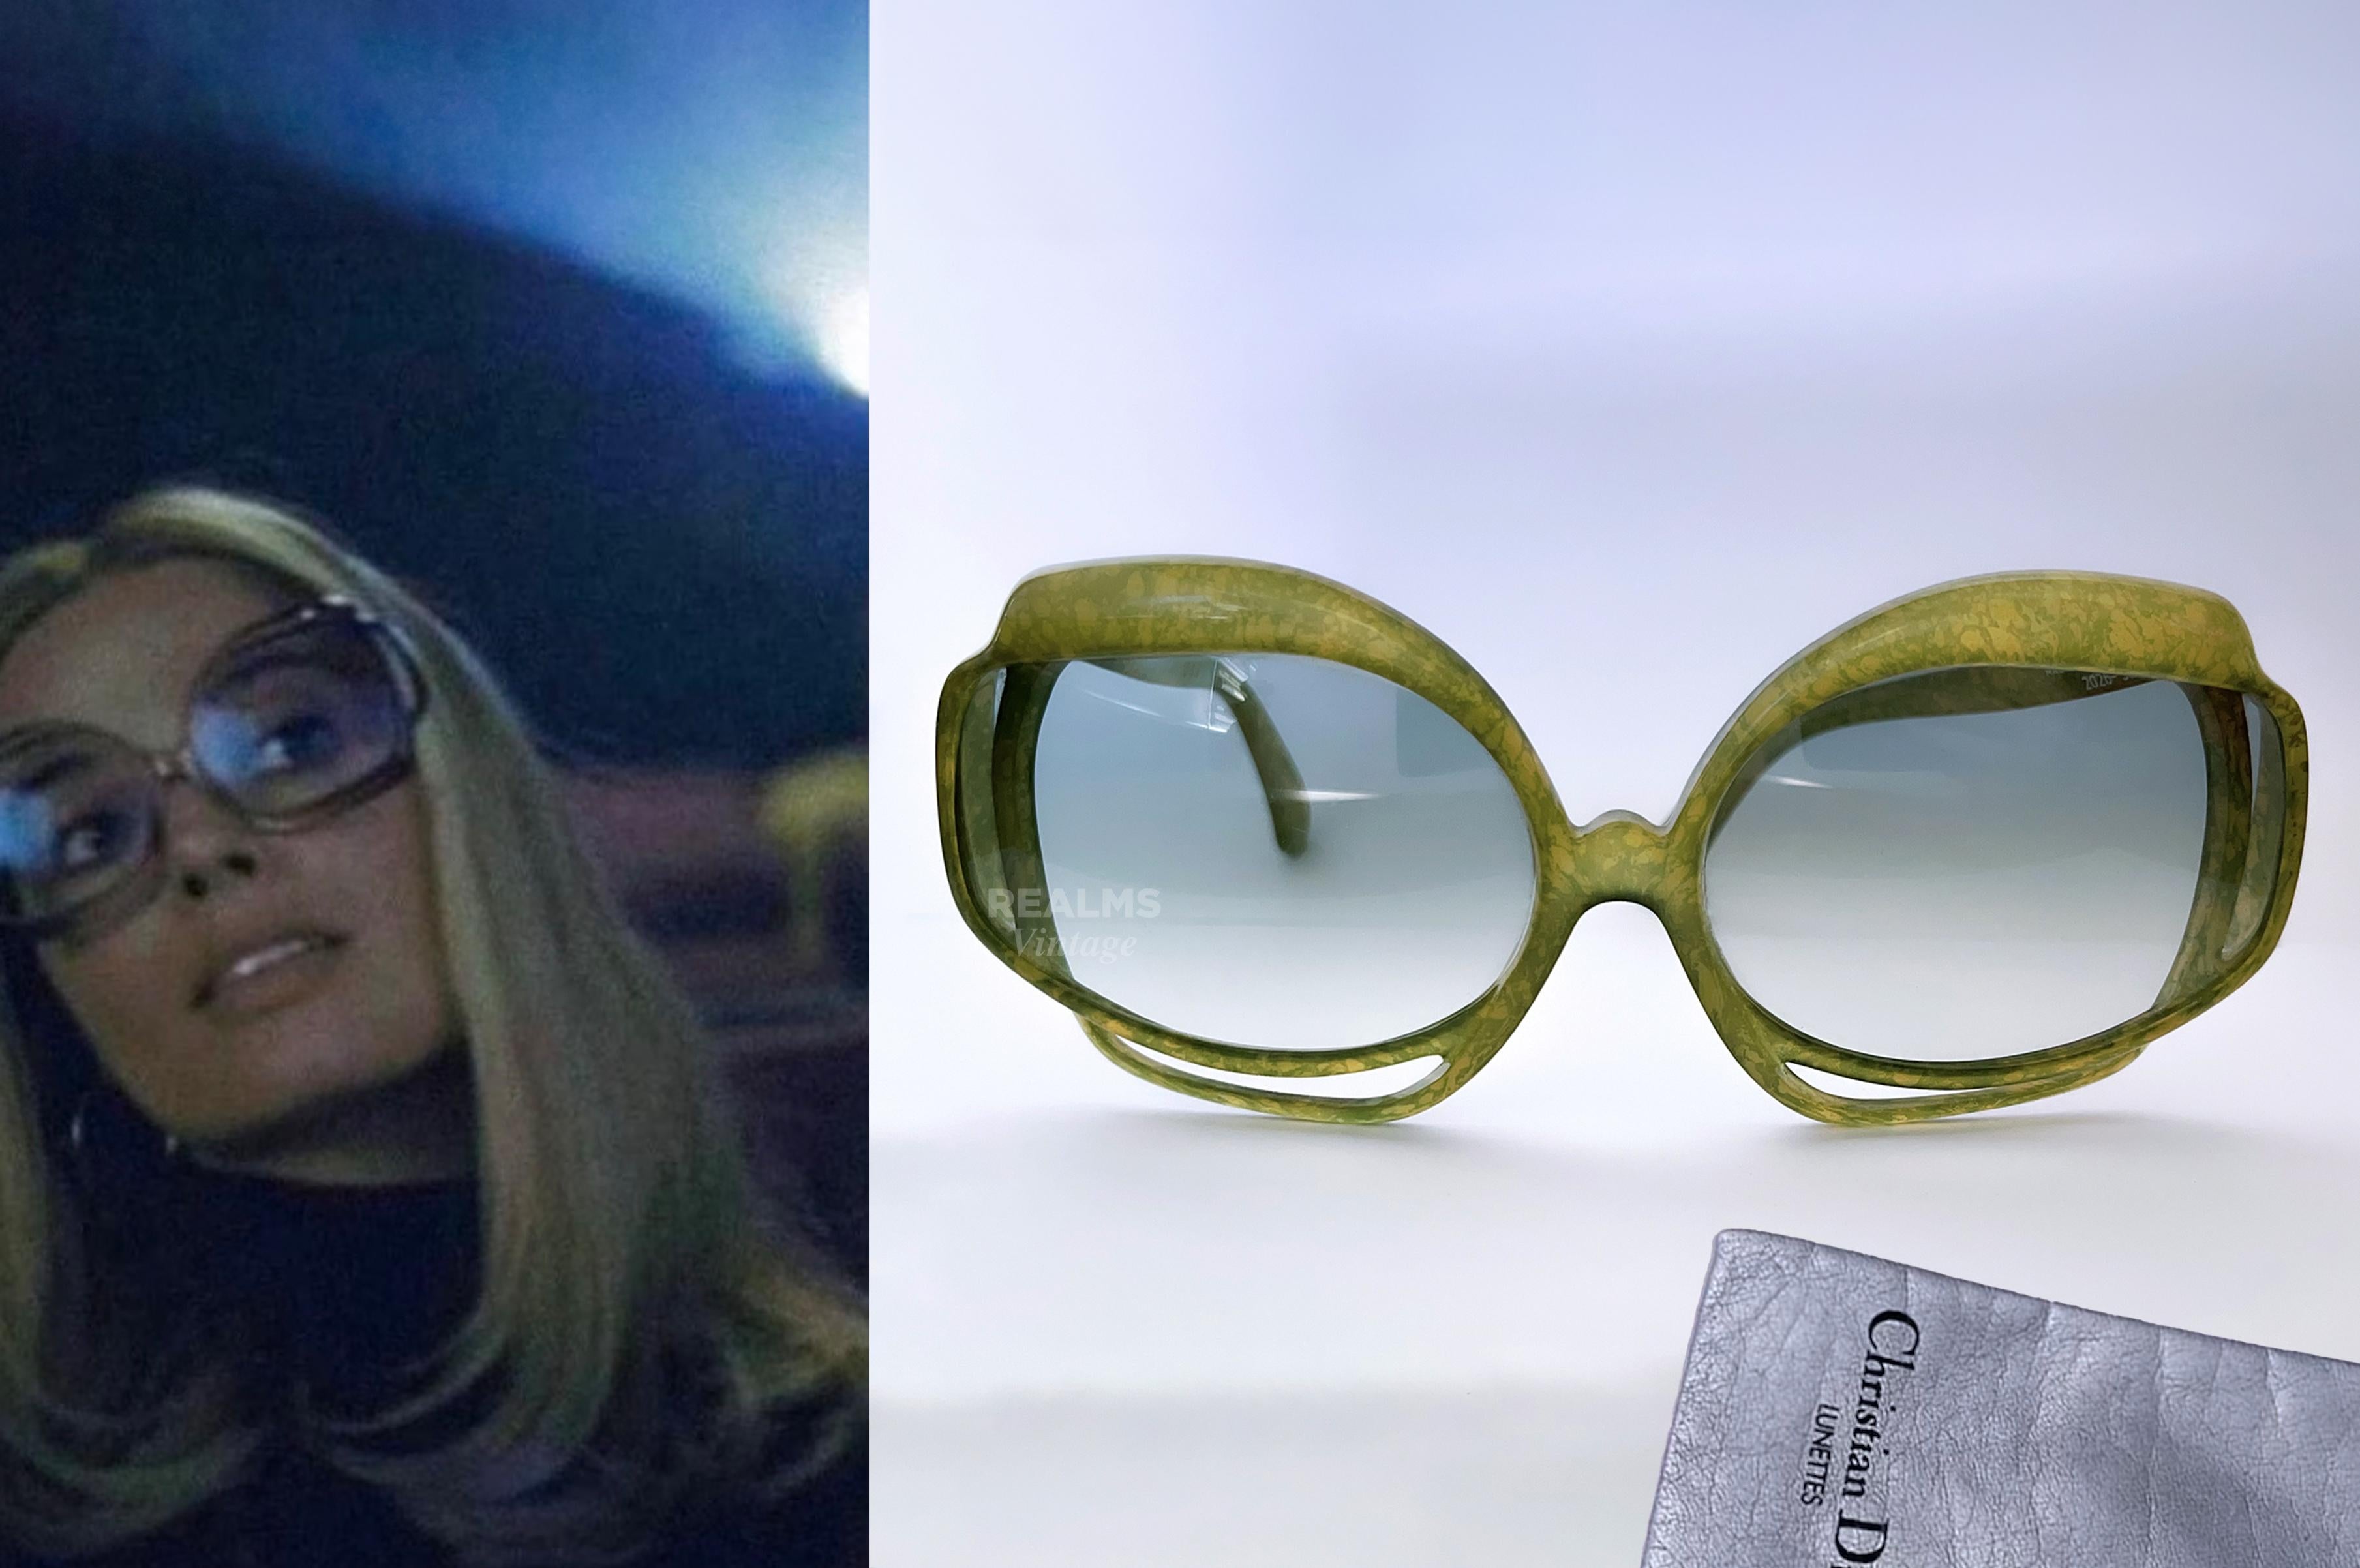 The fabulous iconic Christian Dior oversized sunglasses from the 1970s, 2026-60, one of the most sought after designs. A similar version was worn by Margor Robbie as Sharon Tate in Once upon a time in Hollywood and famously Lady Gaga owns several